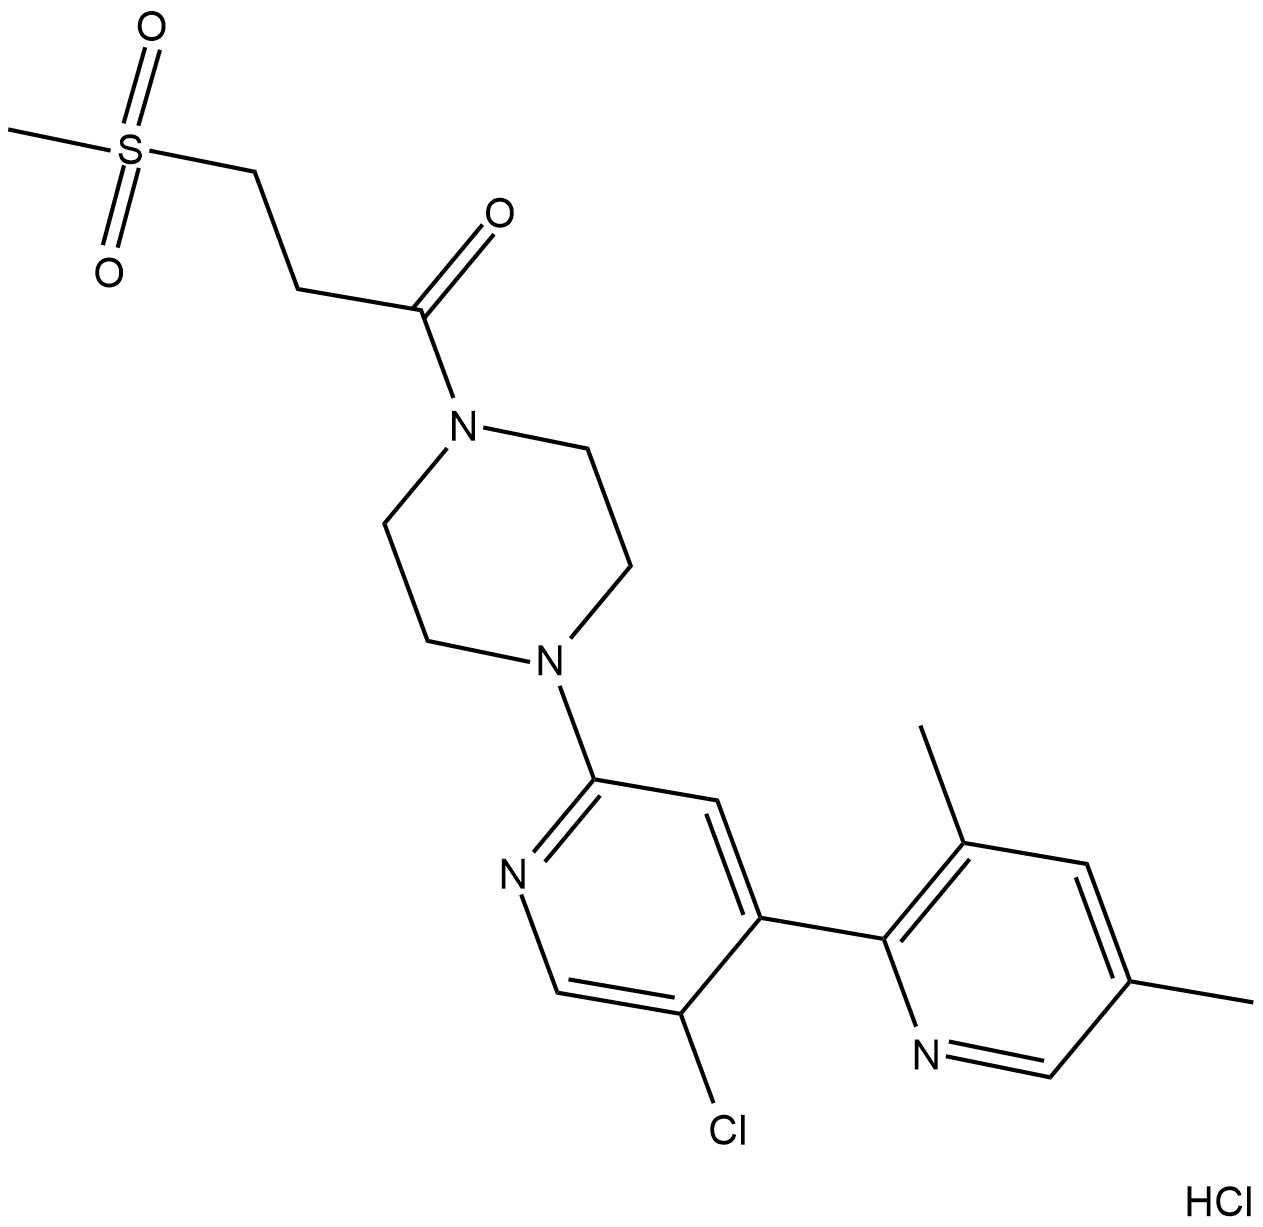 PF-05274857 (hydrochloride)  Chemical Structure